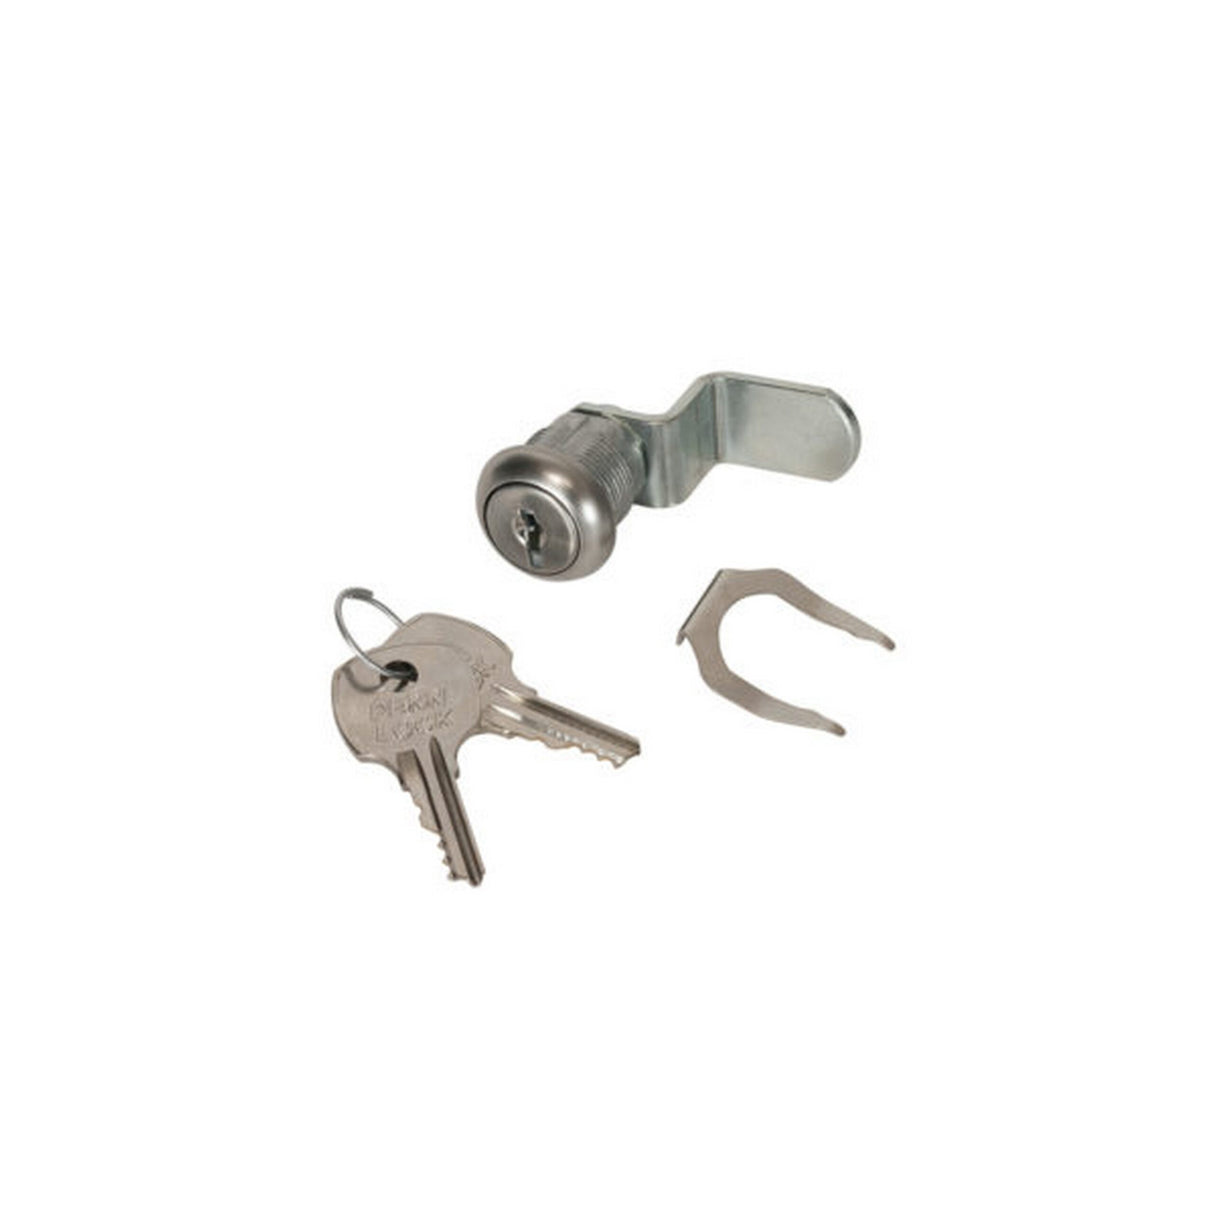 Lowell LLKRD Key and Lock Assembly with Alternate Lock